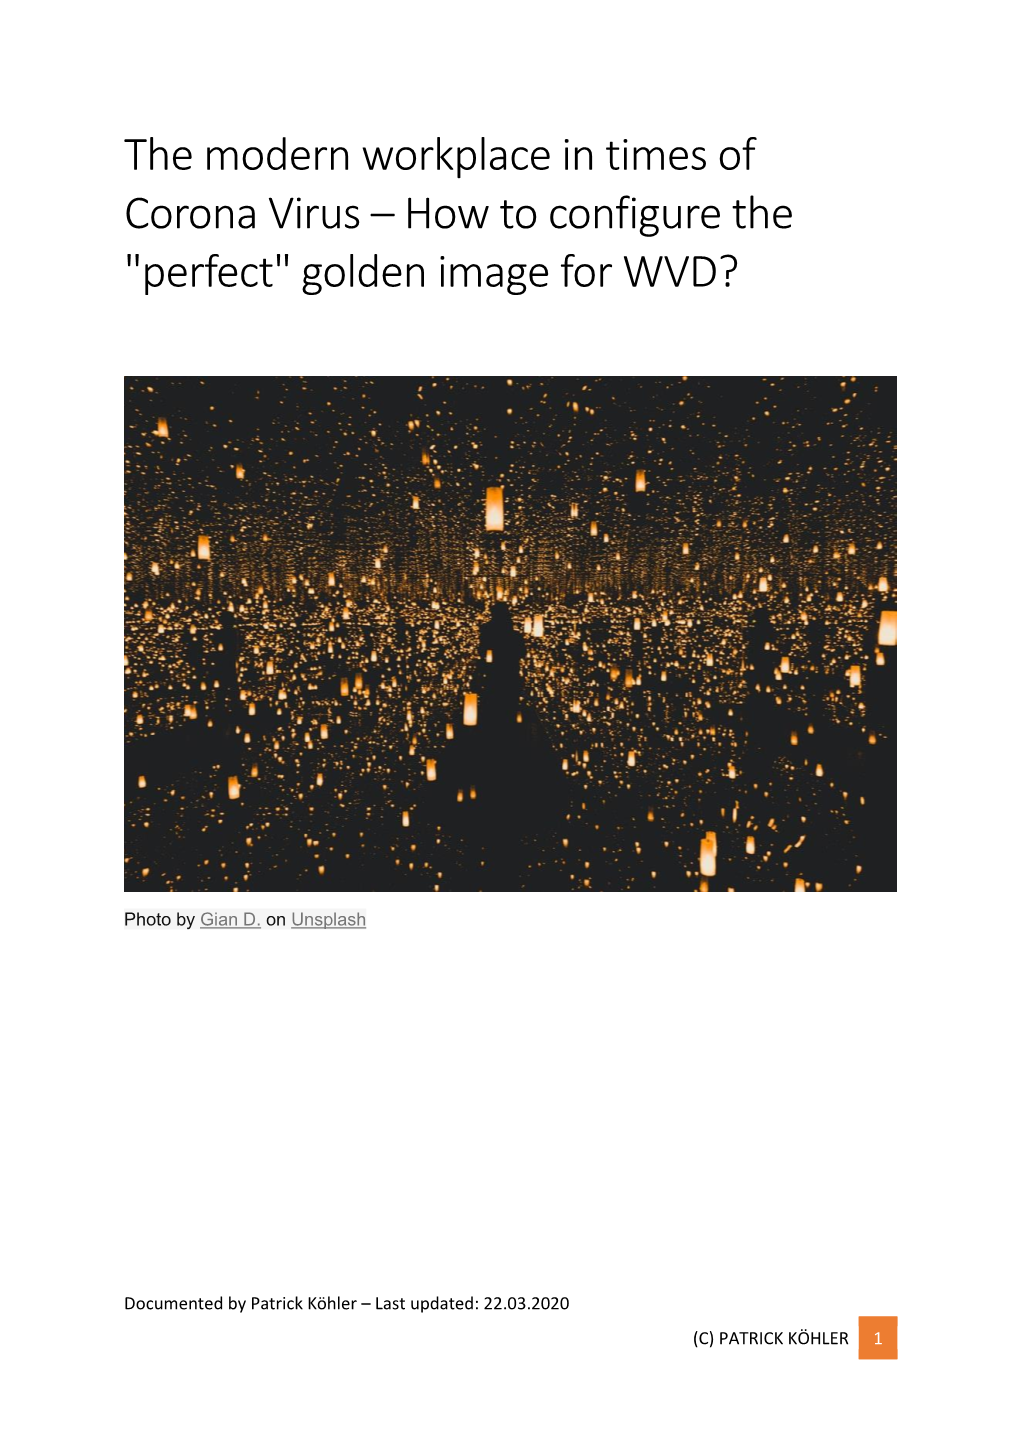 How to Configure the "Perfect" Golden Image for WVD?